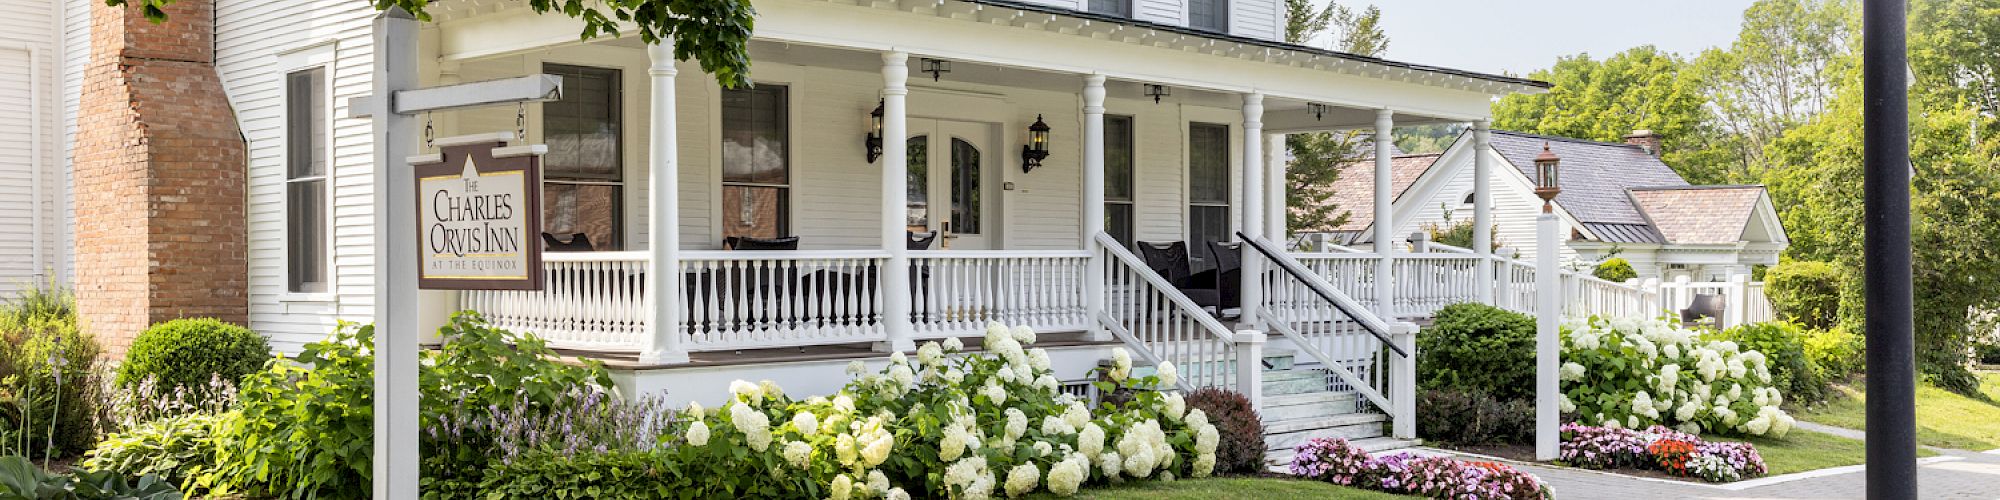 A charming, white two-story house with a porch, surrounded by lush greenery, flowers, and a streetlamp on a sunny day.